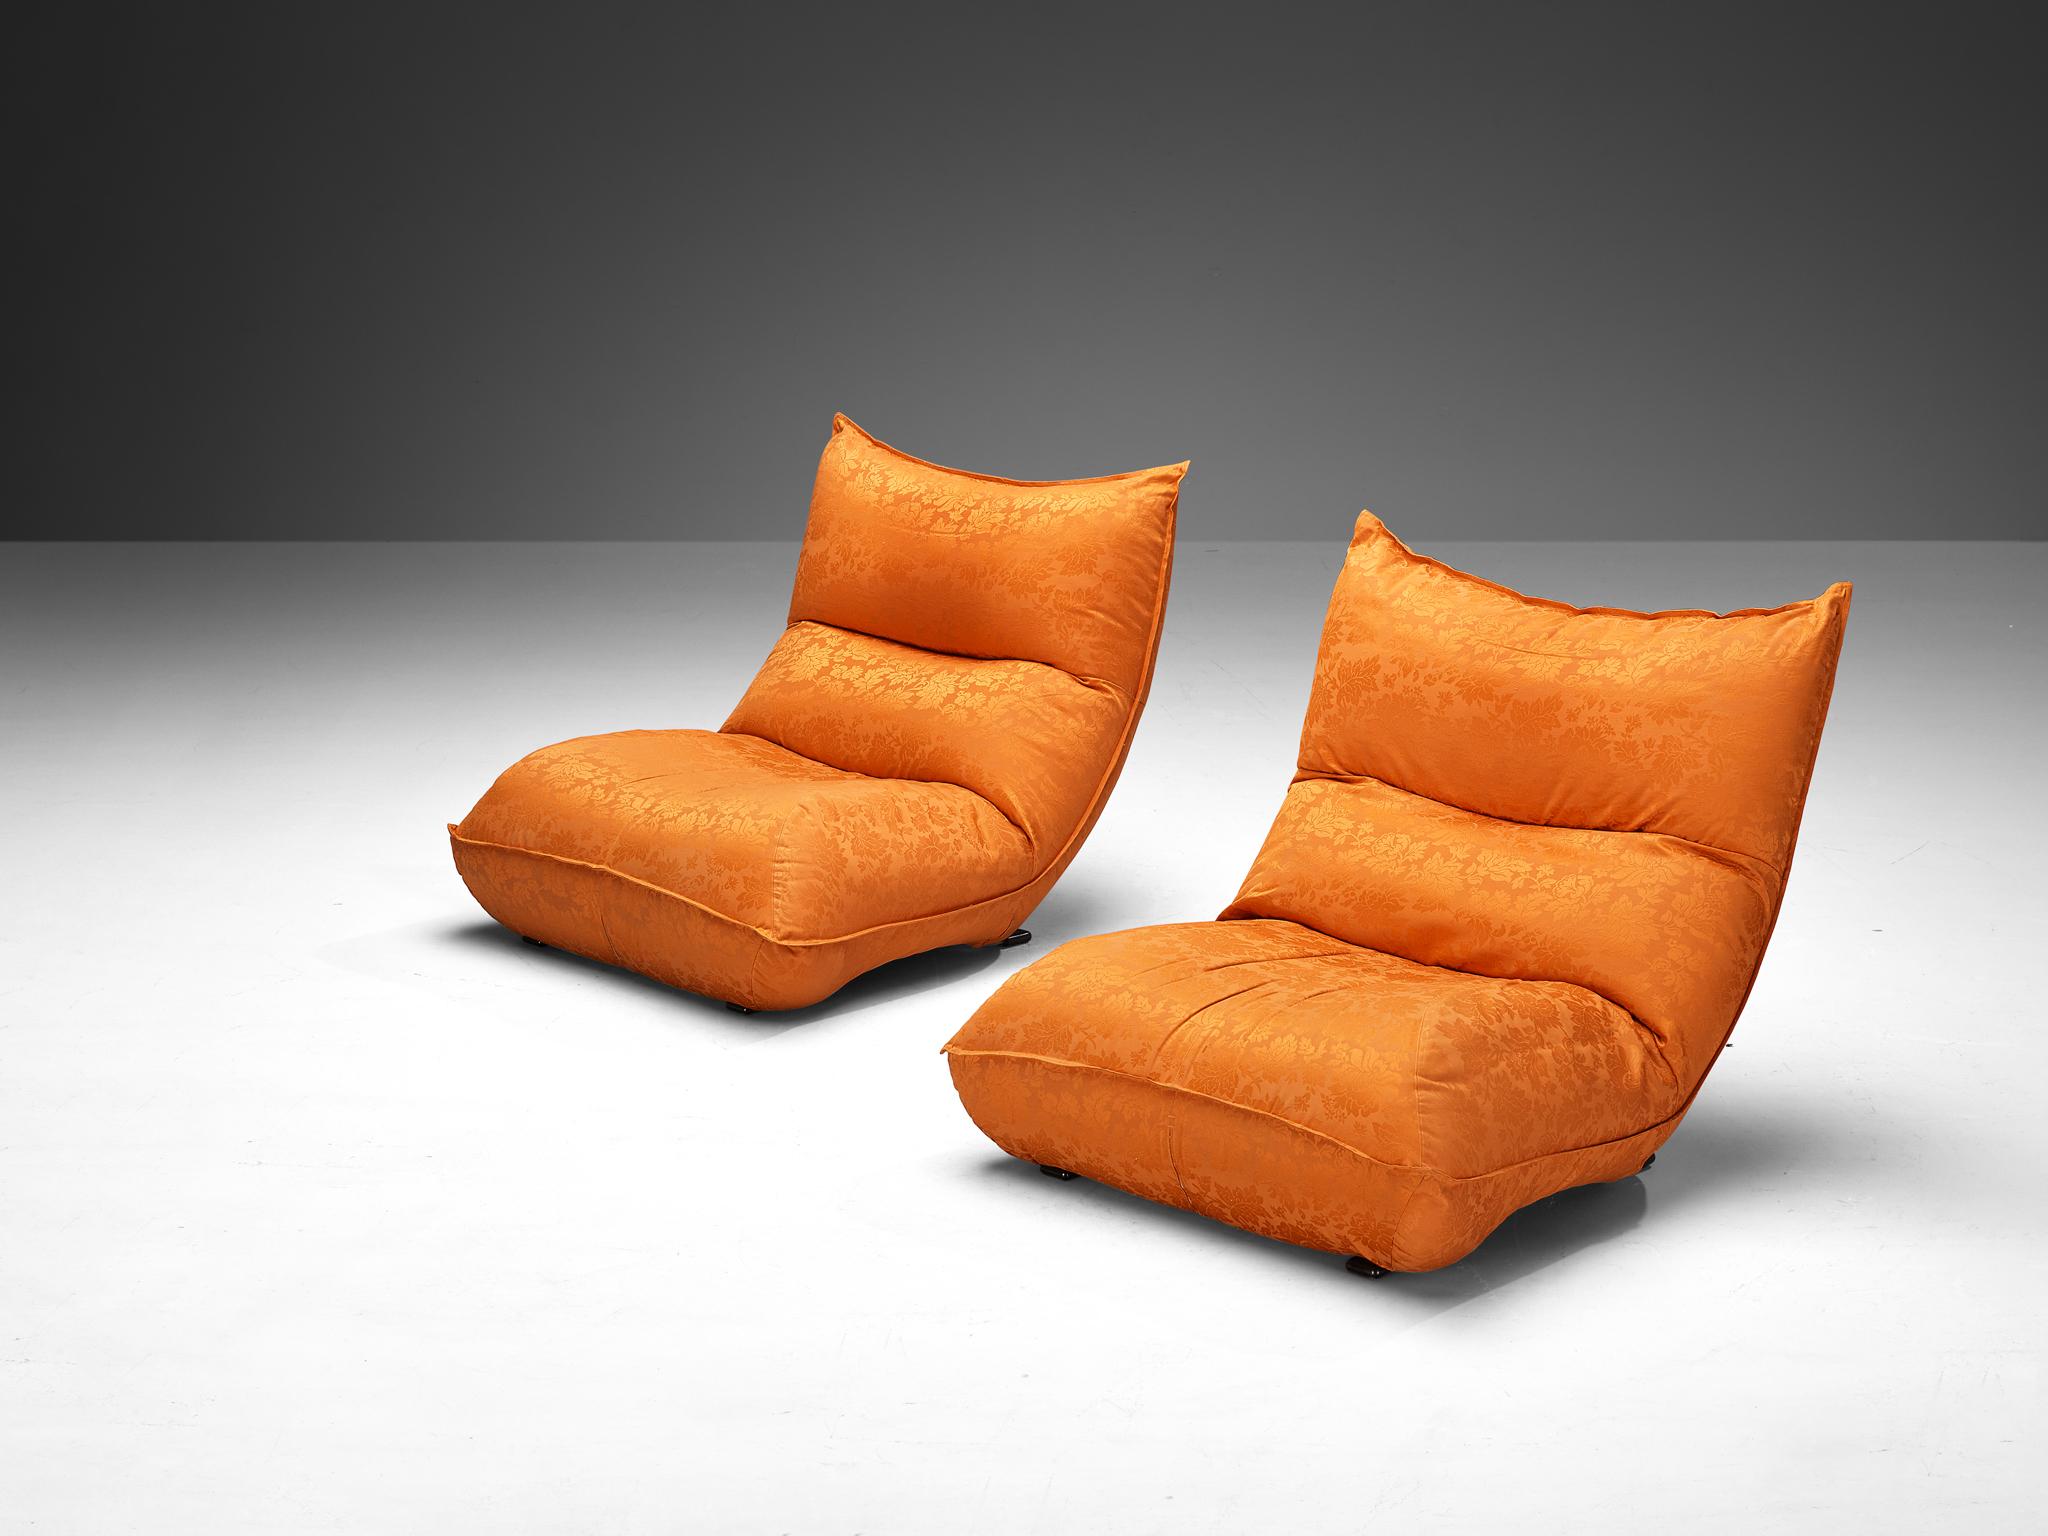 Vittorio Varo for Plan Design Interior, 'Zinzolo' lounge chairs, fabric, Italy, 1970s

These superb Zinzola lounge chairs are designed by the Italian Vittorio Varo. This design reflects the spirit of the 1970s, characterized by a bold departure from